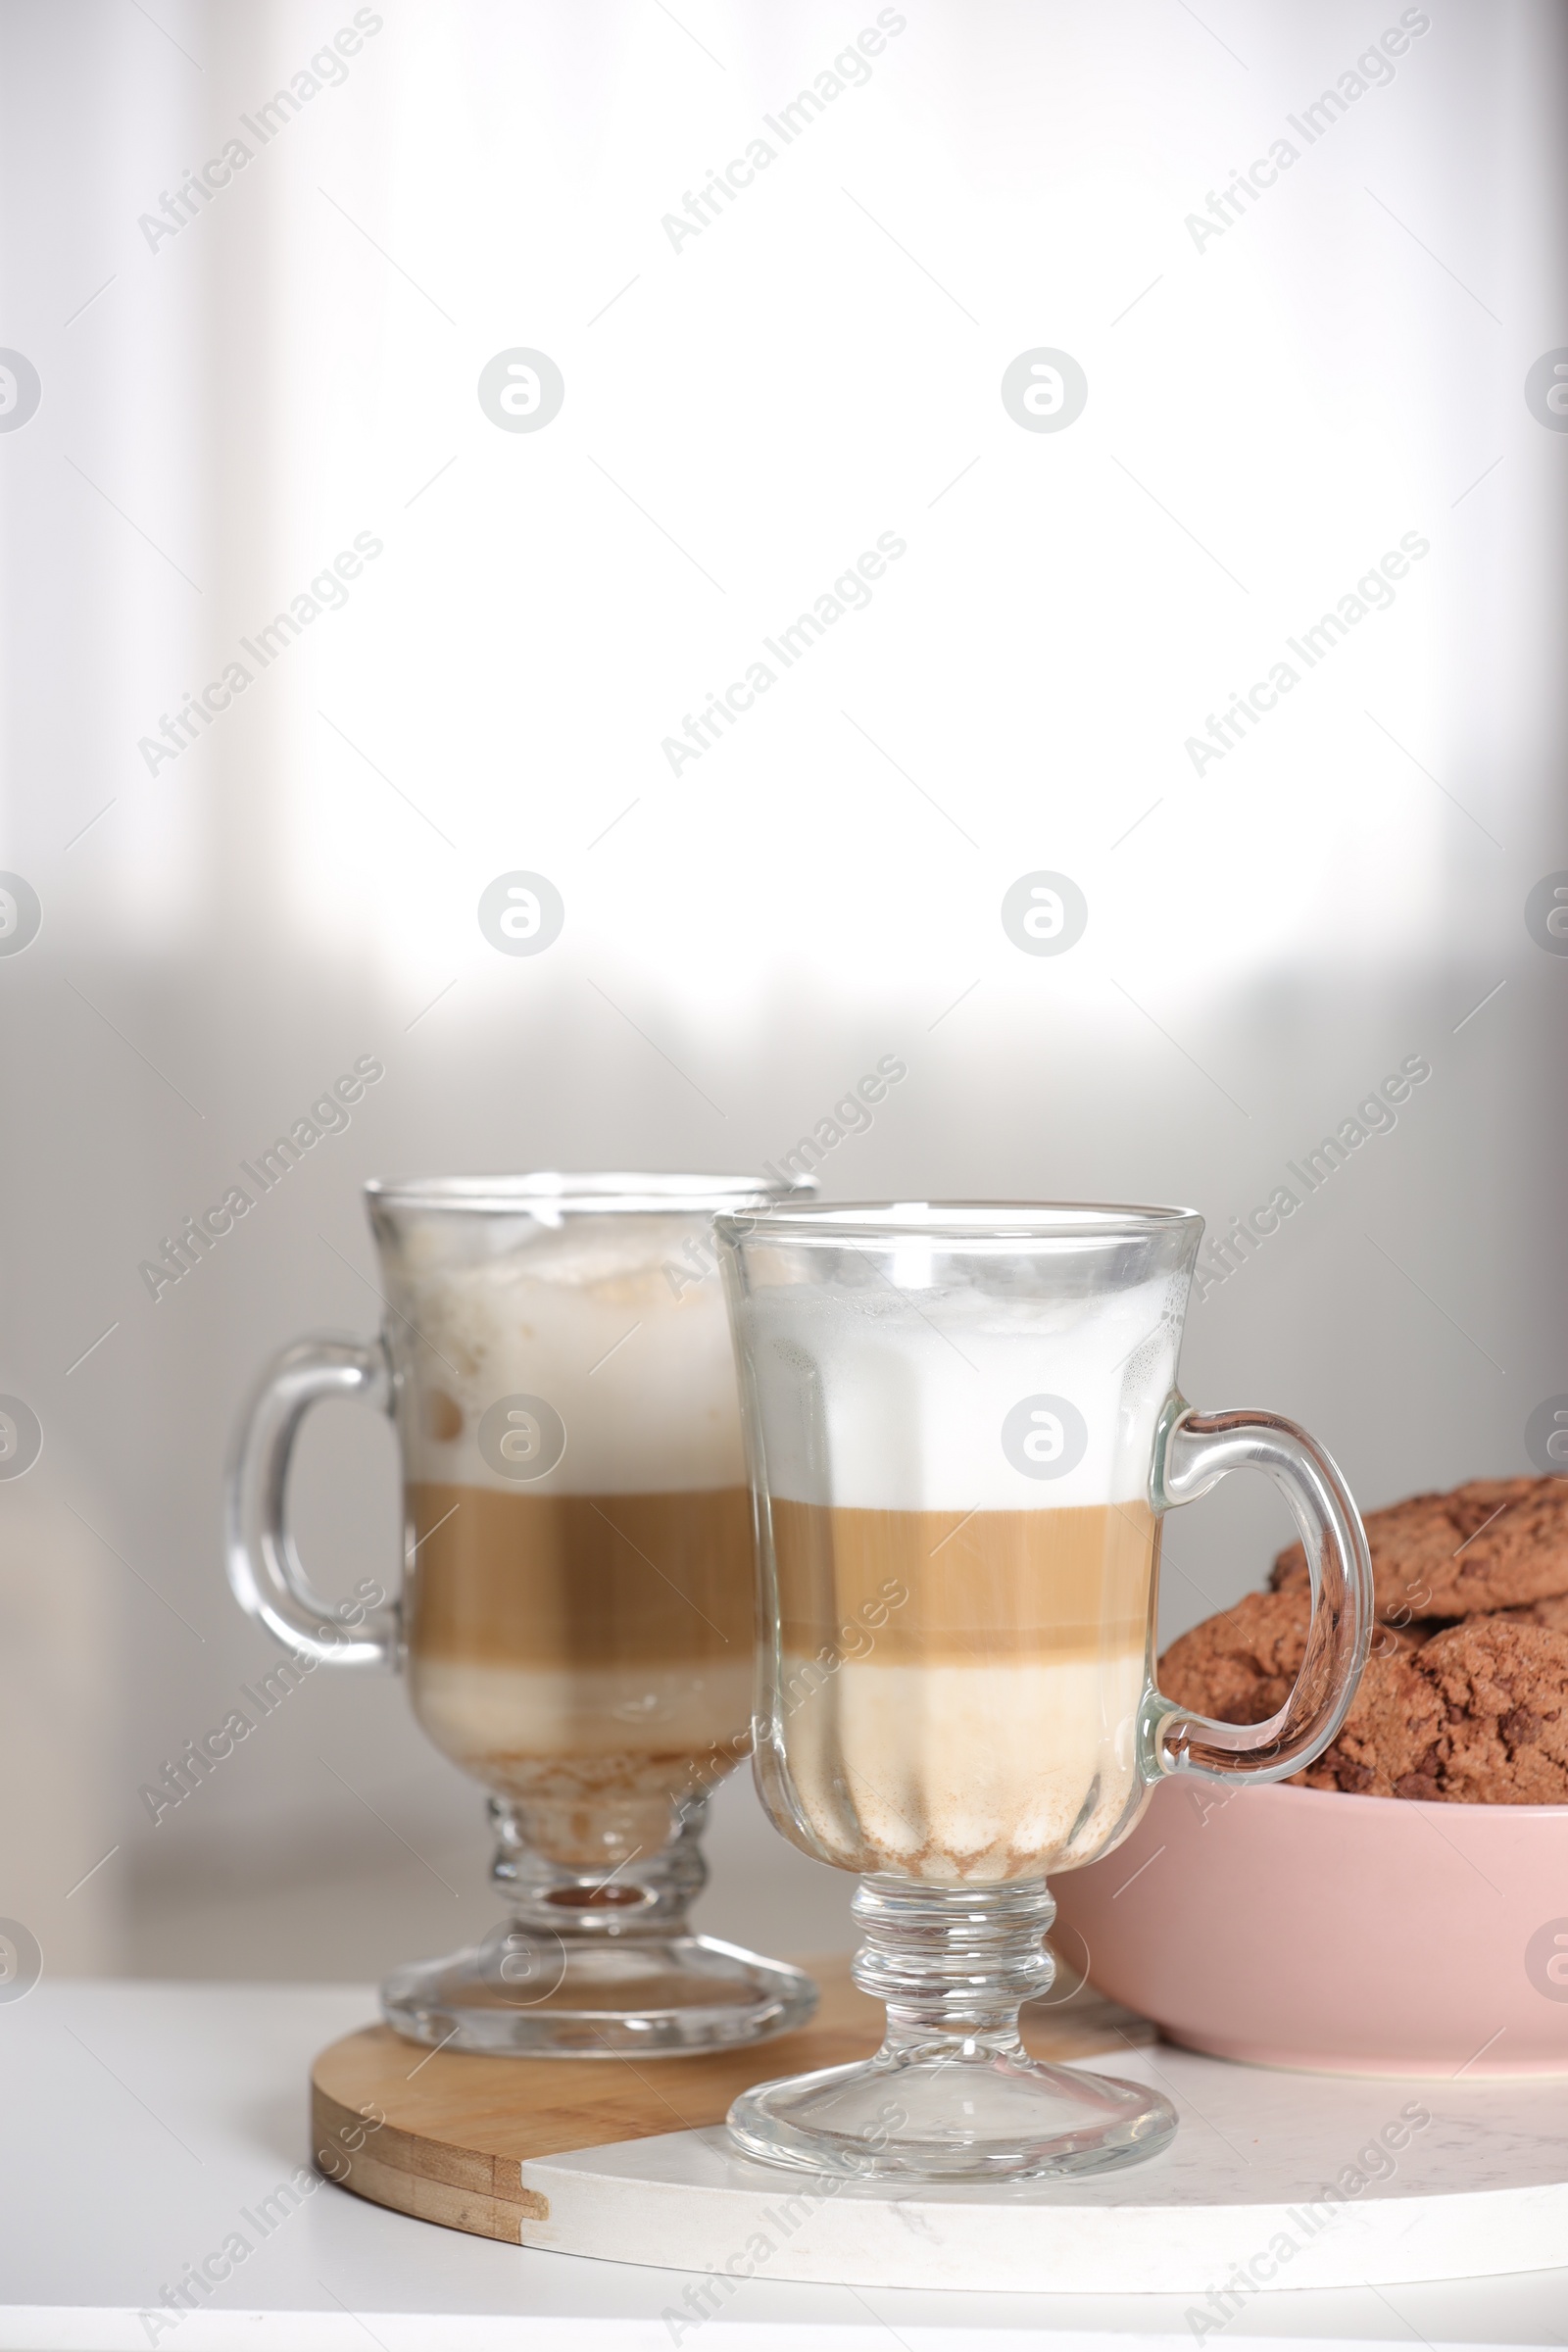 Photo of Aromatic latte macchiato in glasses and chocolate cookies on white table against light background